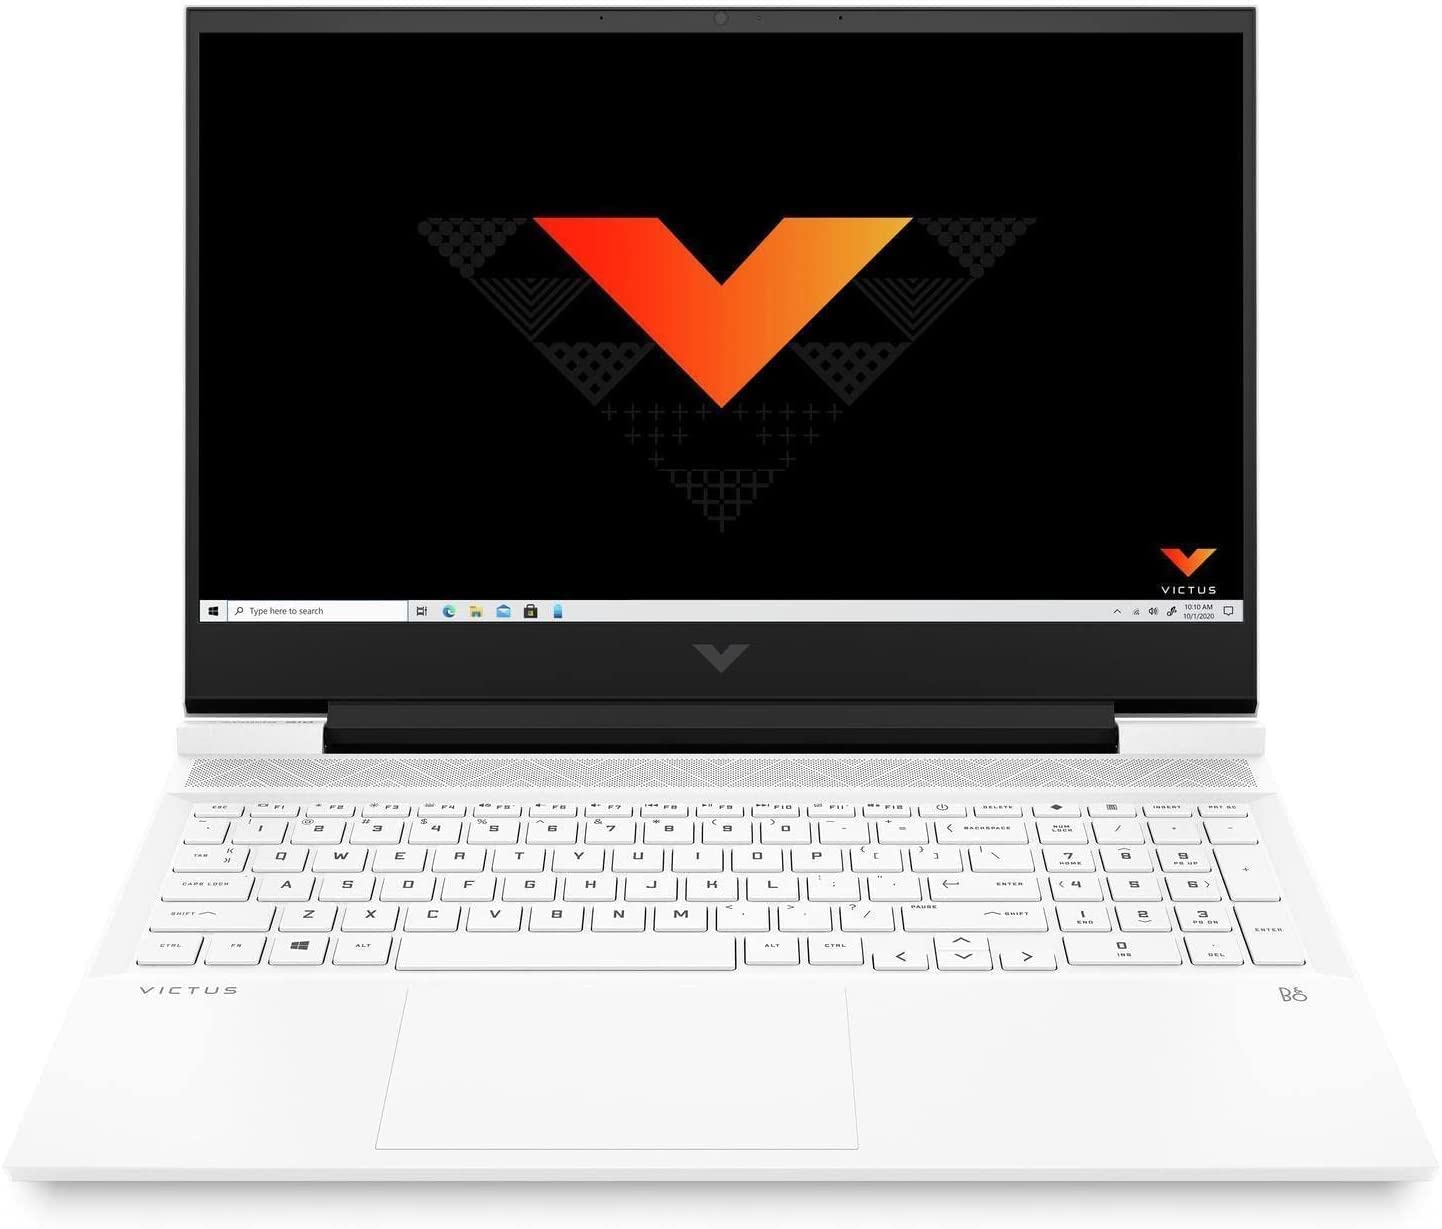 HP Victus 16-D0032NA 16.1” FHD Gaming Laptop – Core i5-11400H (6 Cores, 4.5GHz), Nvidia GeForce GTX 3050 Ti, 32 DDR4, 1TB SSD, WIFI 6 & BT 5.0, Free upgrade to Windows 11–UK Backlit Keyboard (Renewed)